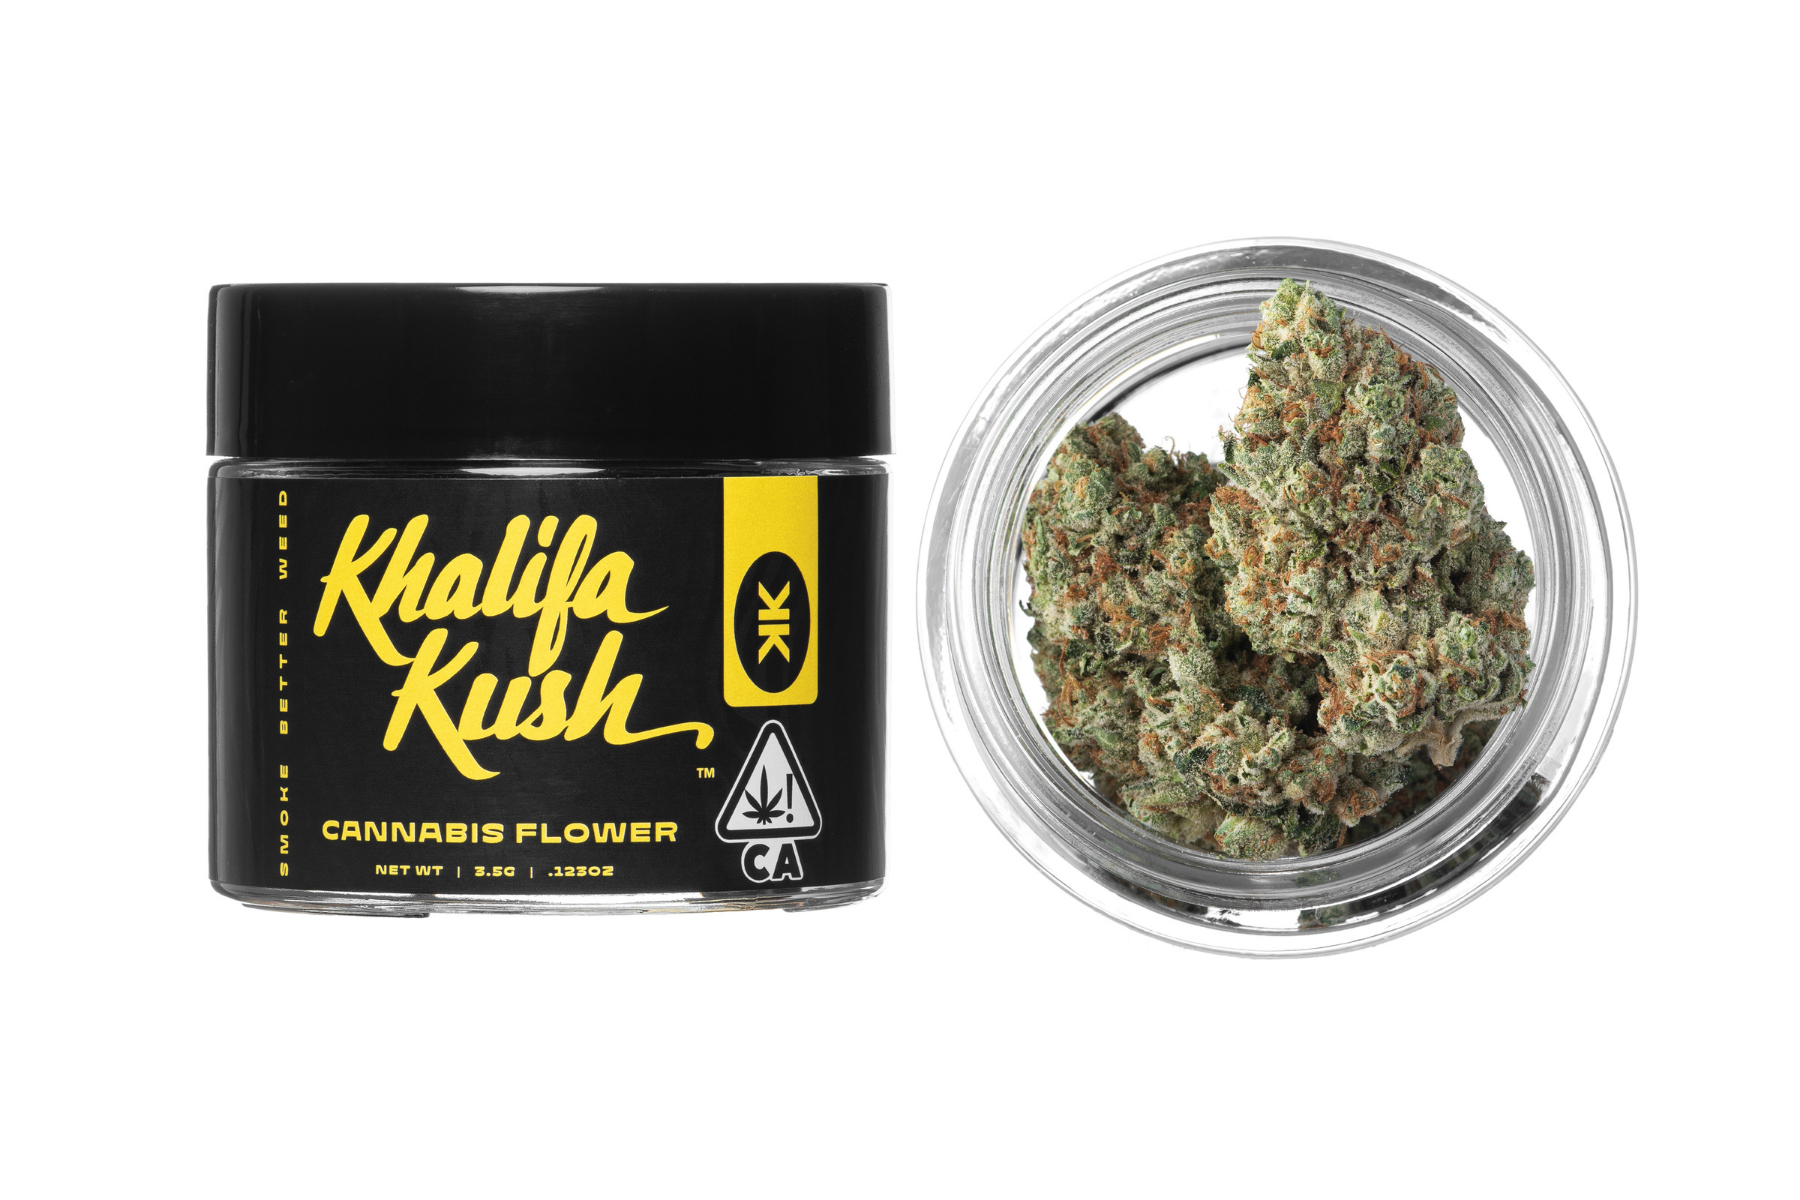 Khalifa Kush, was one of the first rapper weed strain's in the weed industry.